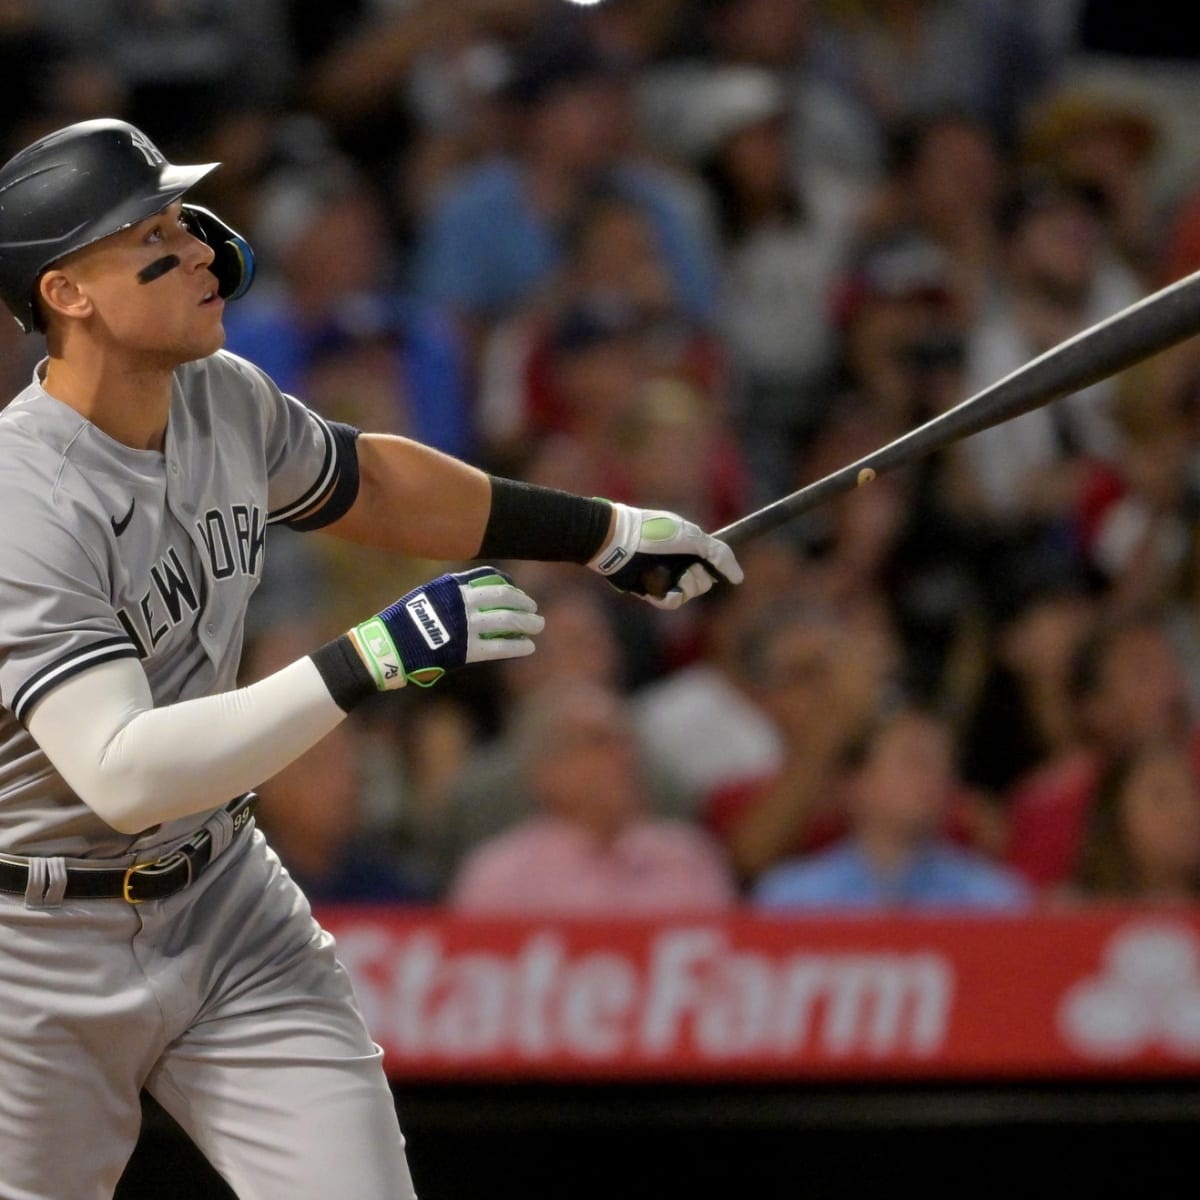 Yankees' Giancarlo Stanton doesn't like batting stance question